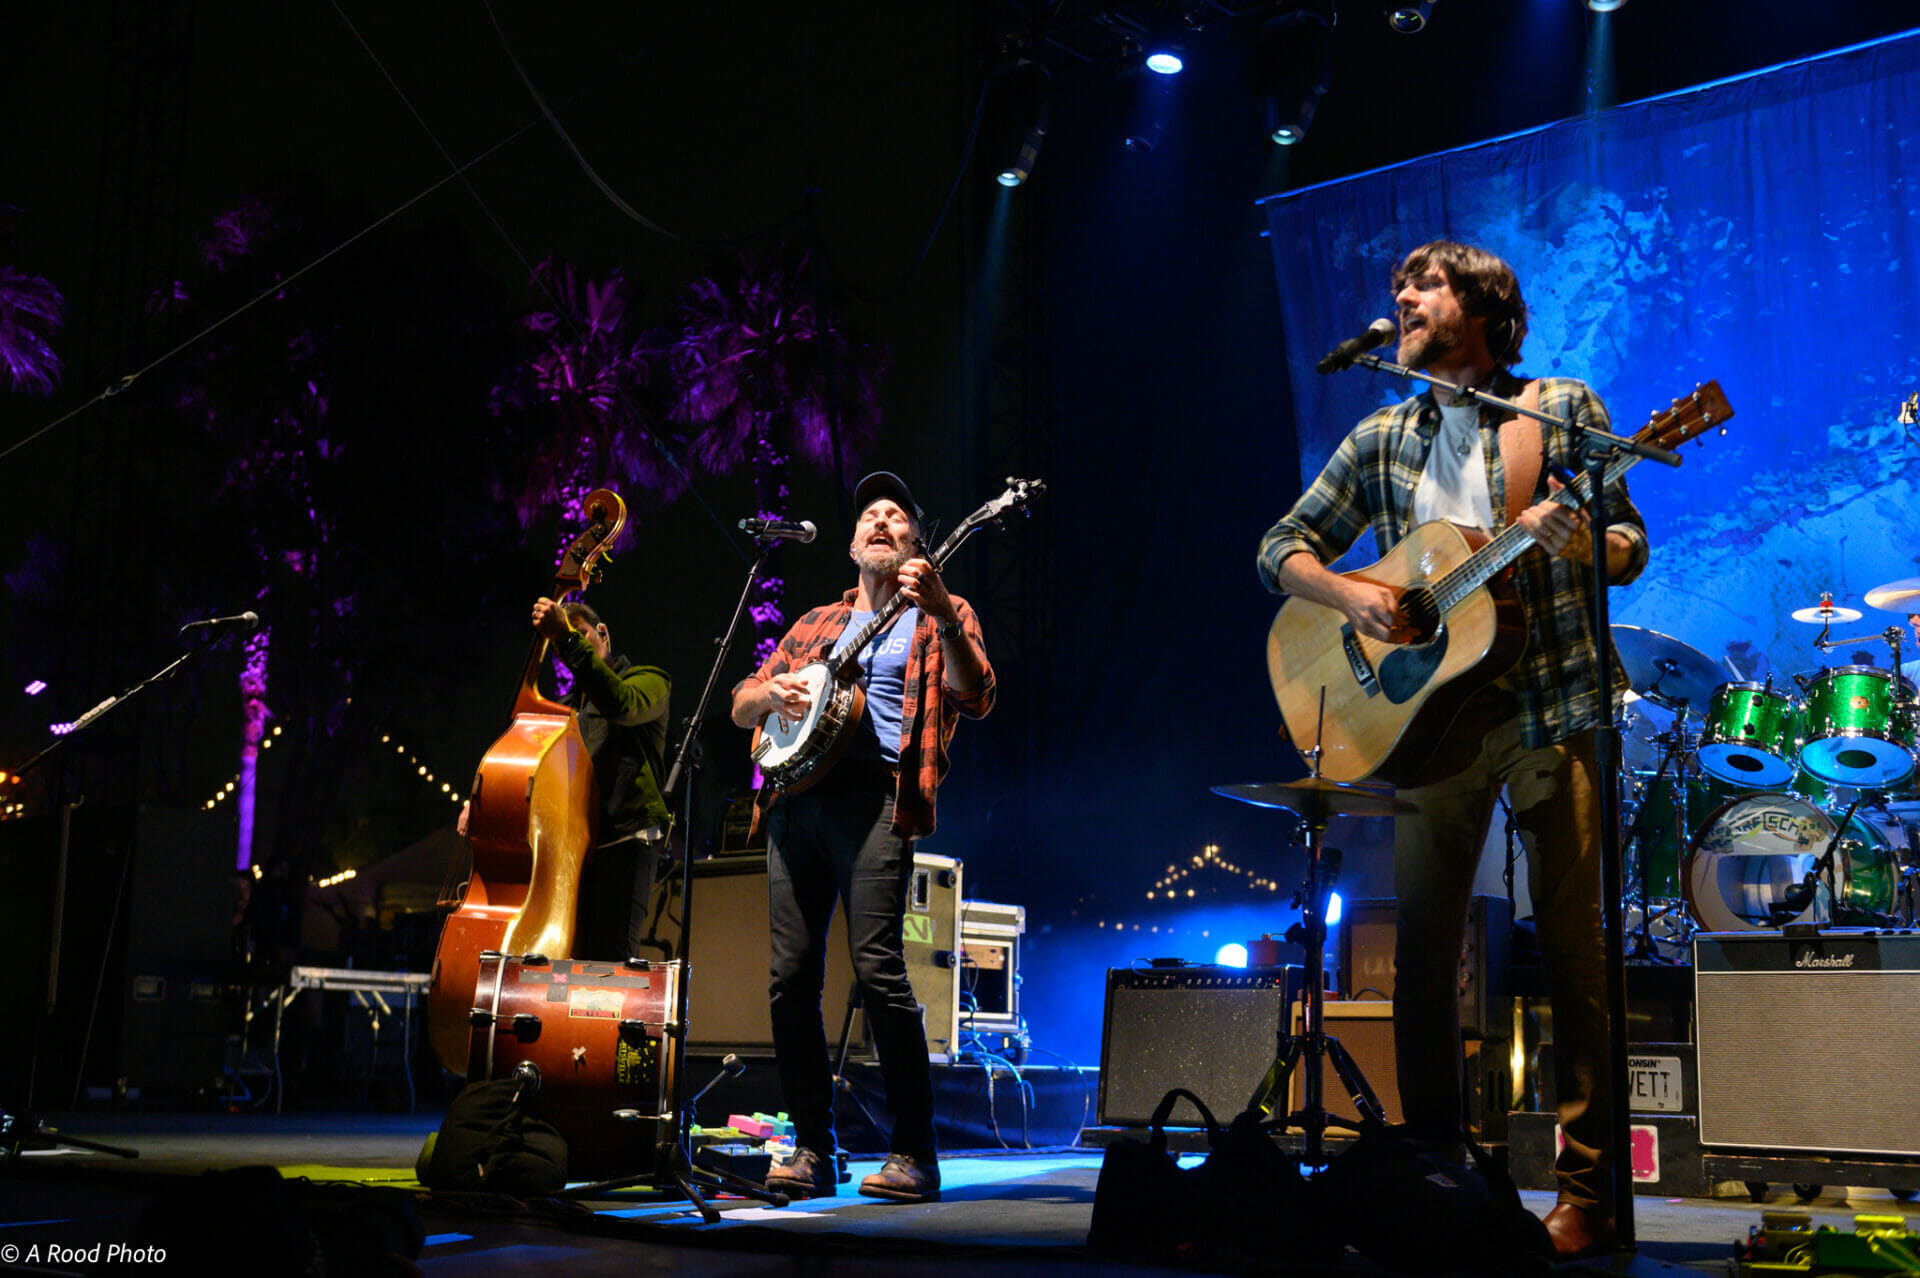 Beachlife Ranch Festival Kicks Off with Jack Johnson, The Avett Brothers and More (A Gallery)